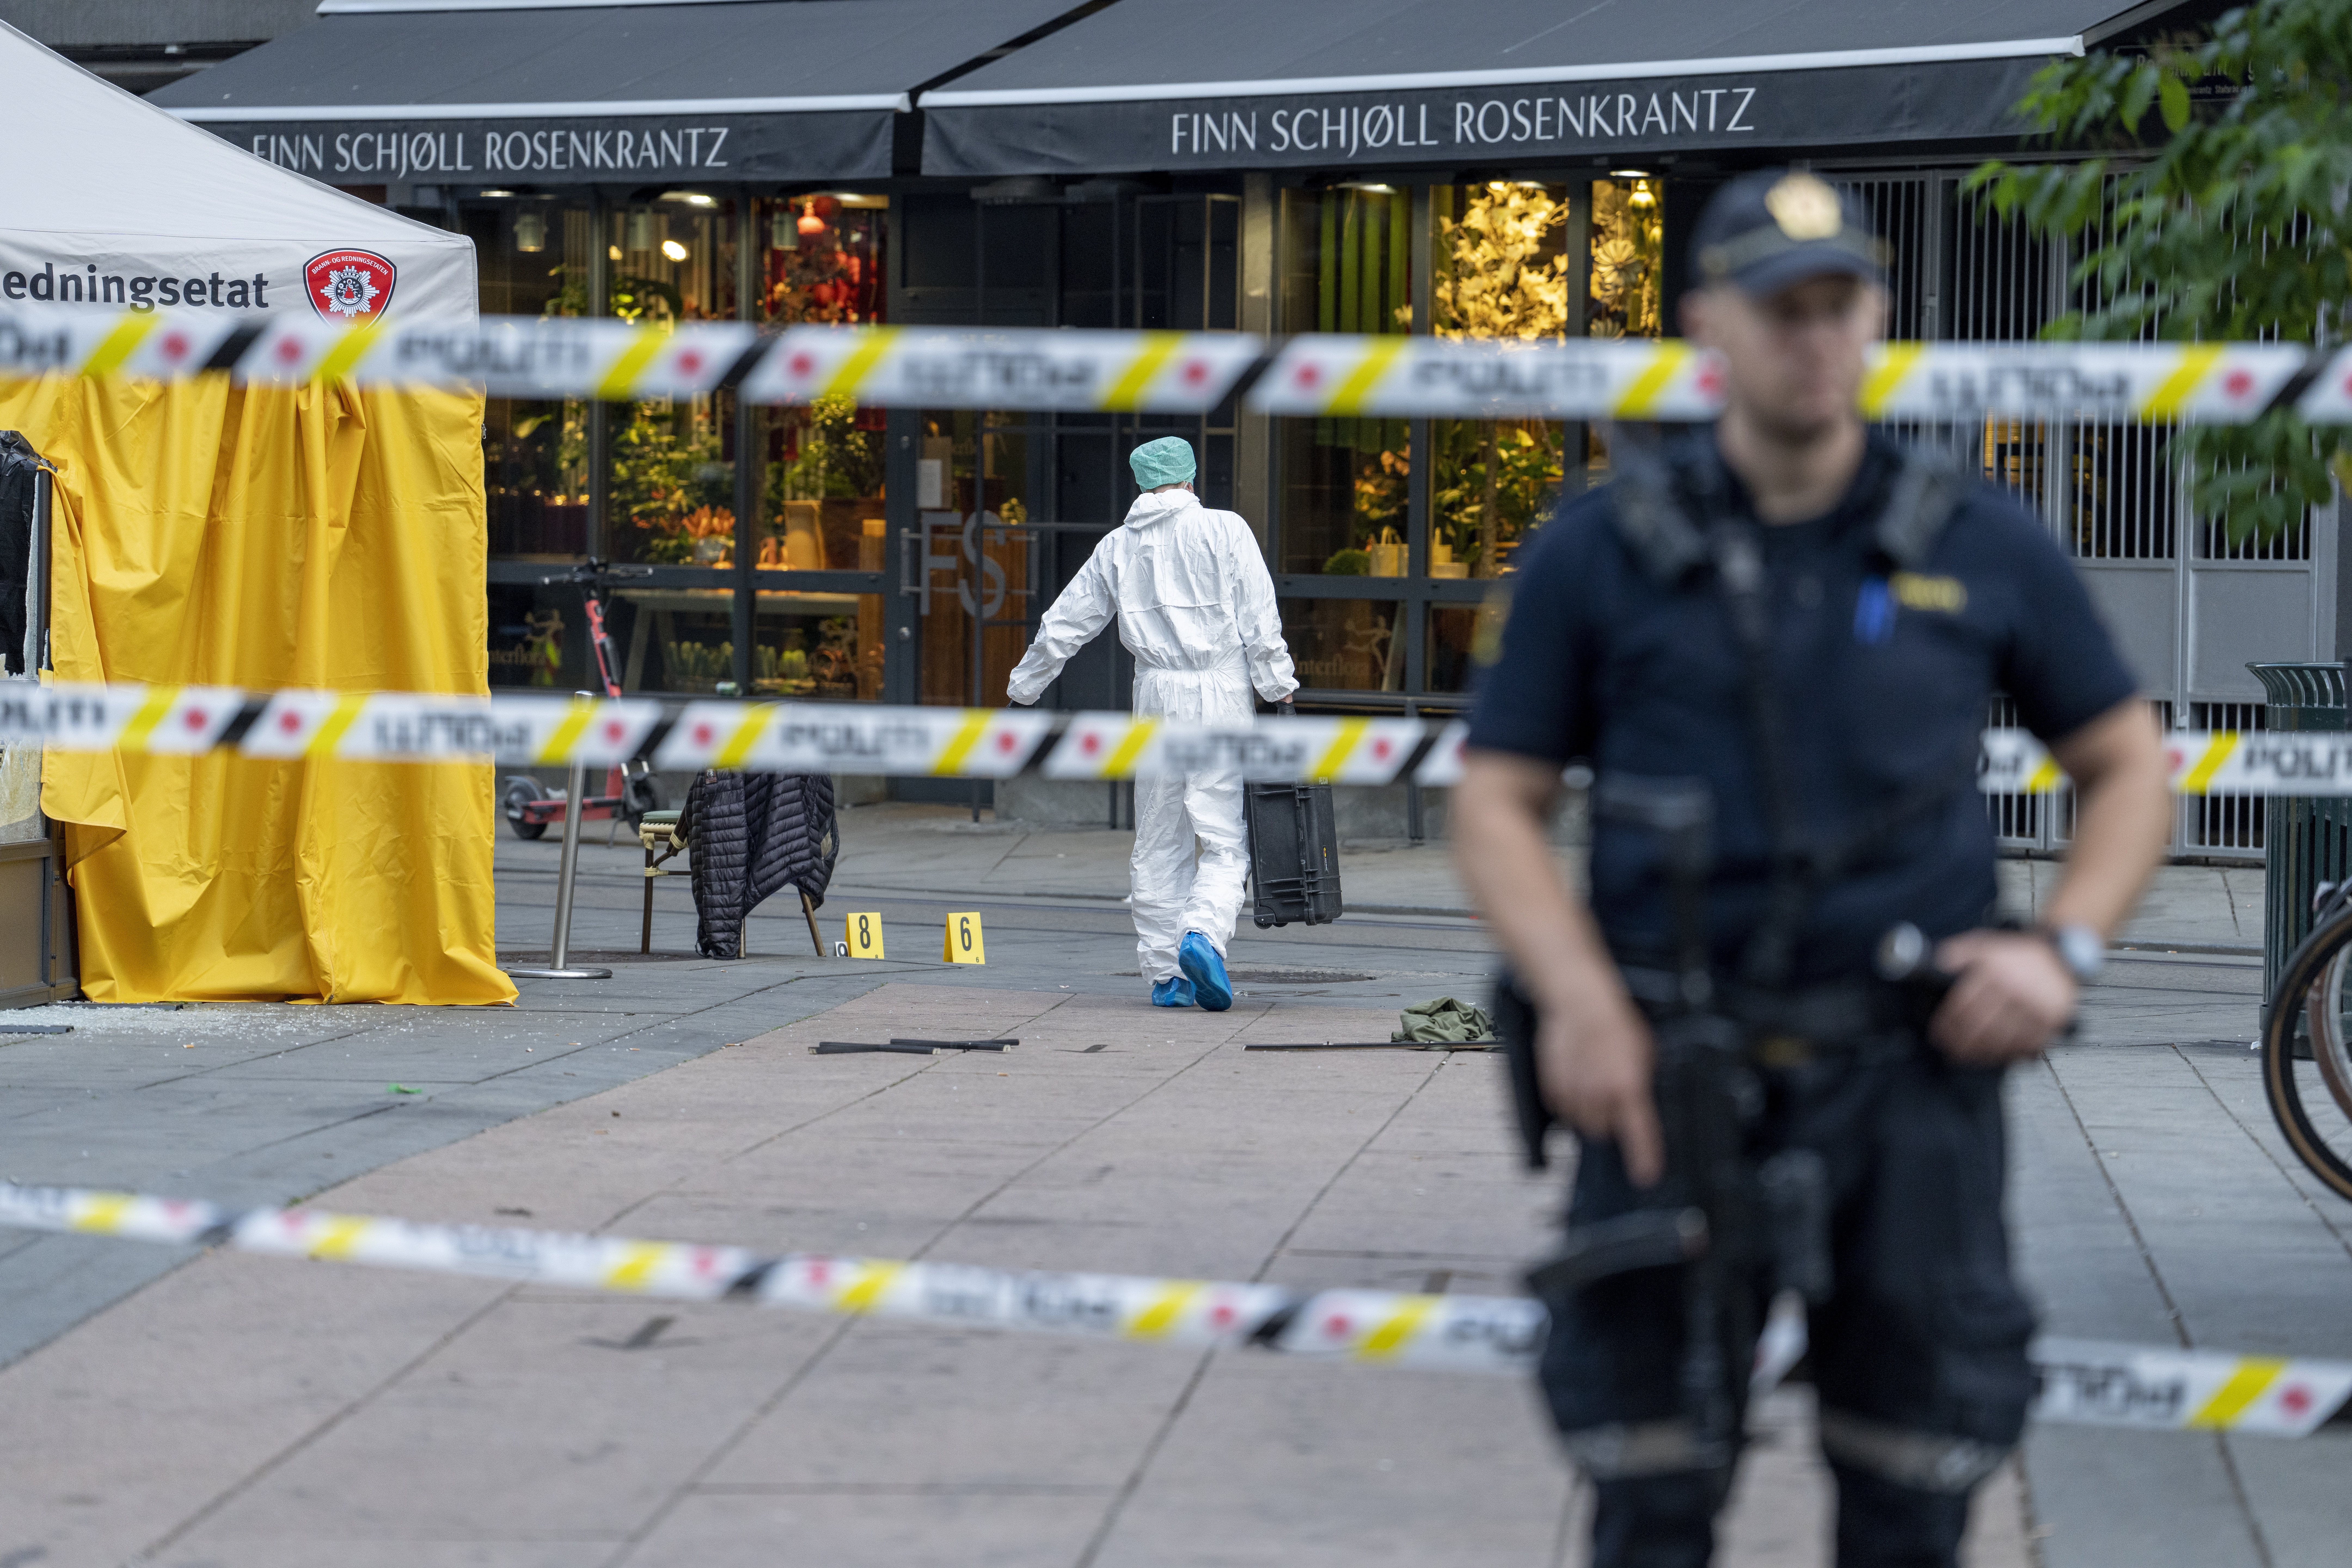 Two people dead, several injured in shooting at pub in Oslo